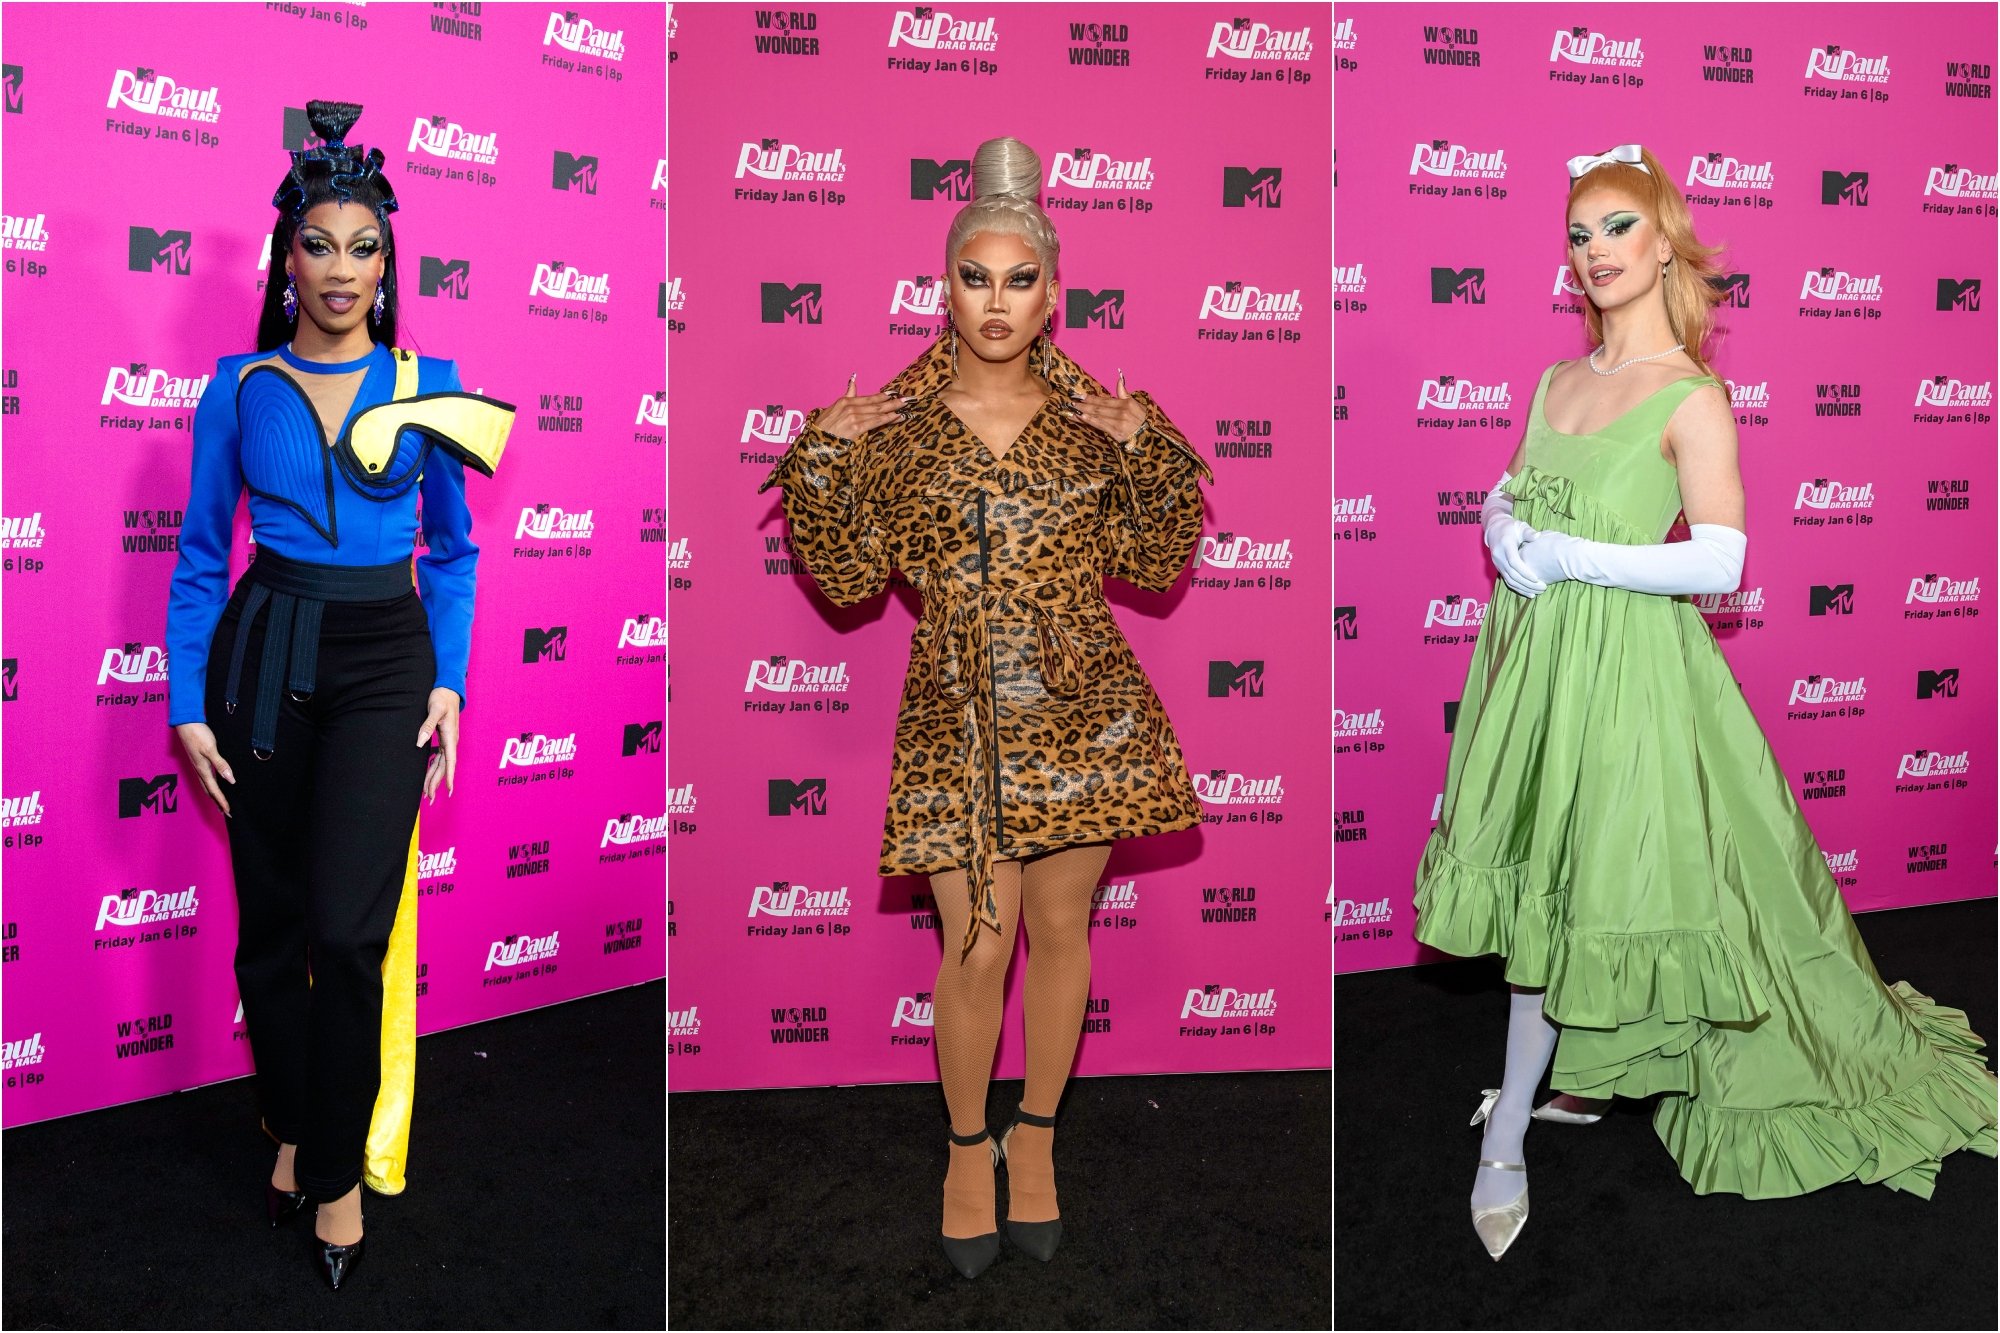 'RuPaul's Drag Race' Season 15 Robin Fierce, Aura Mayari, and Marcia Marcia Marcia standing in front of a pink step and repeat, posing with their garments